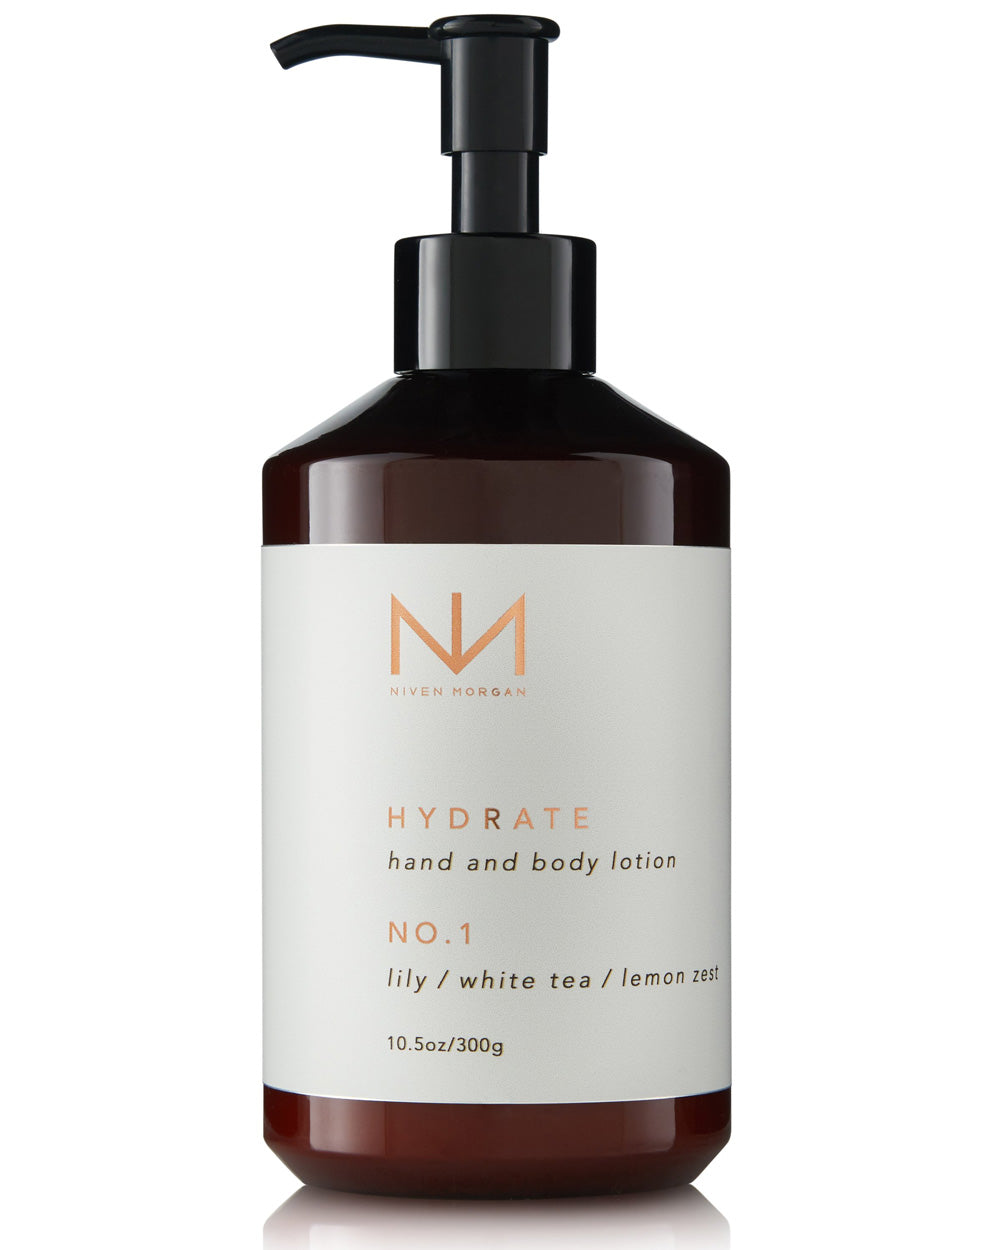 No.1 Hand and Body Lotion